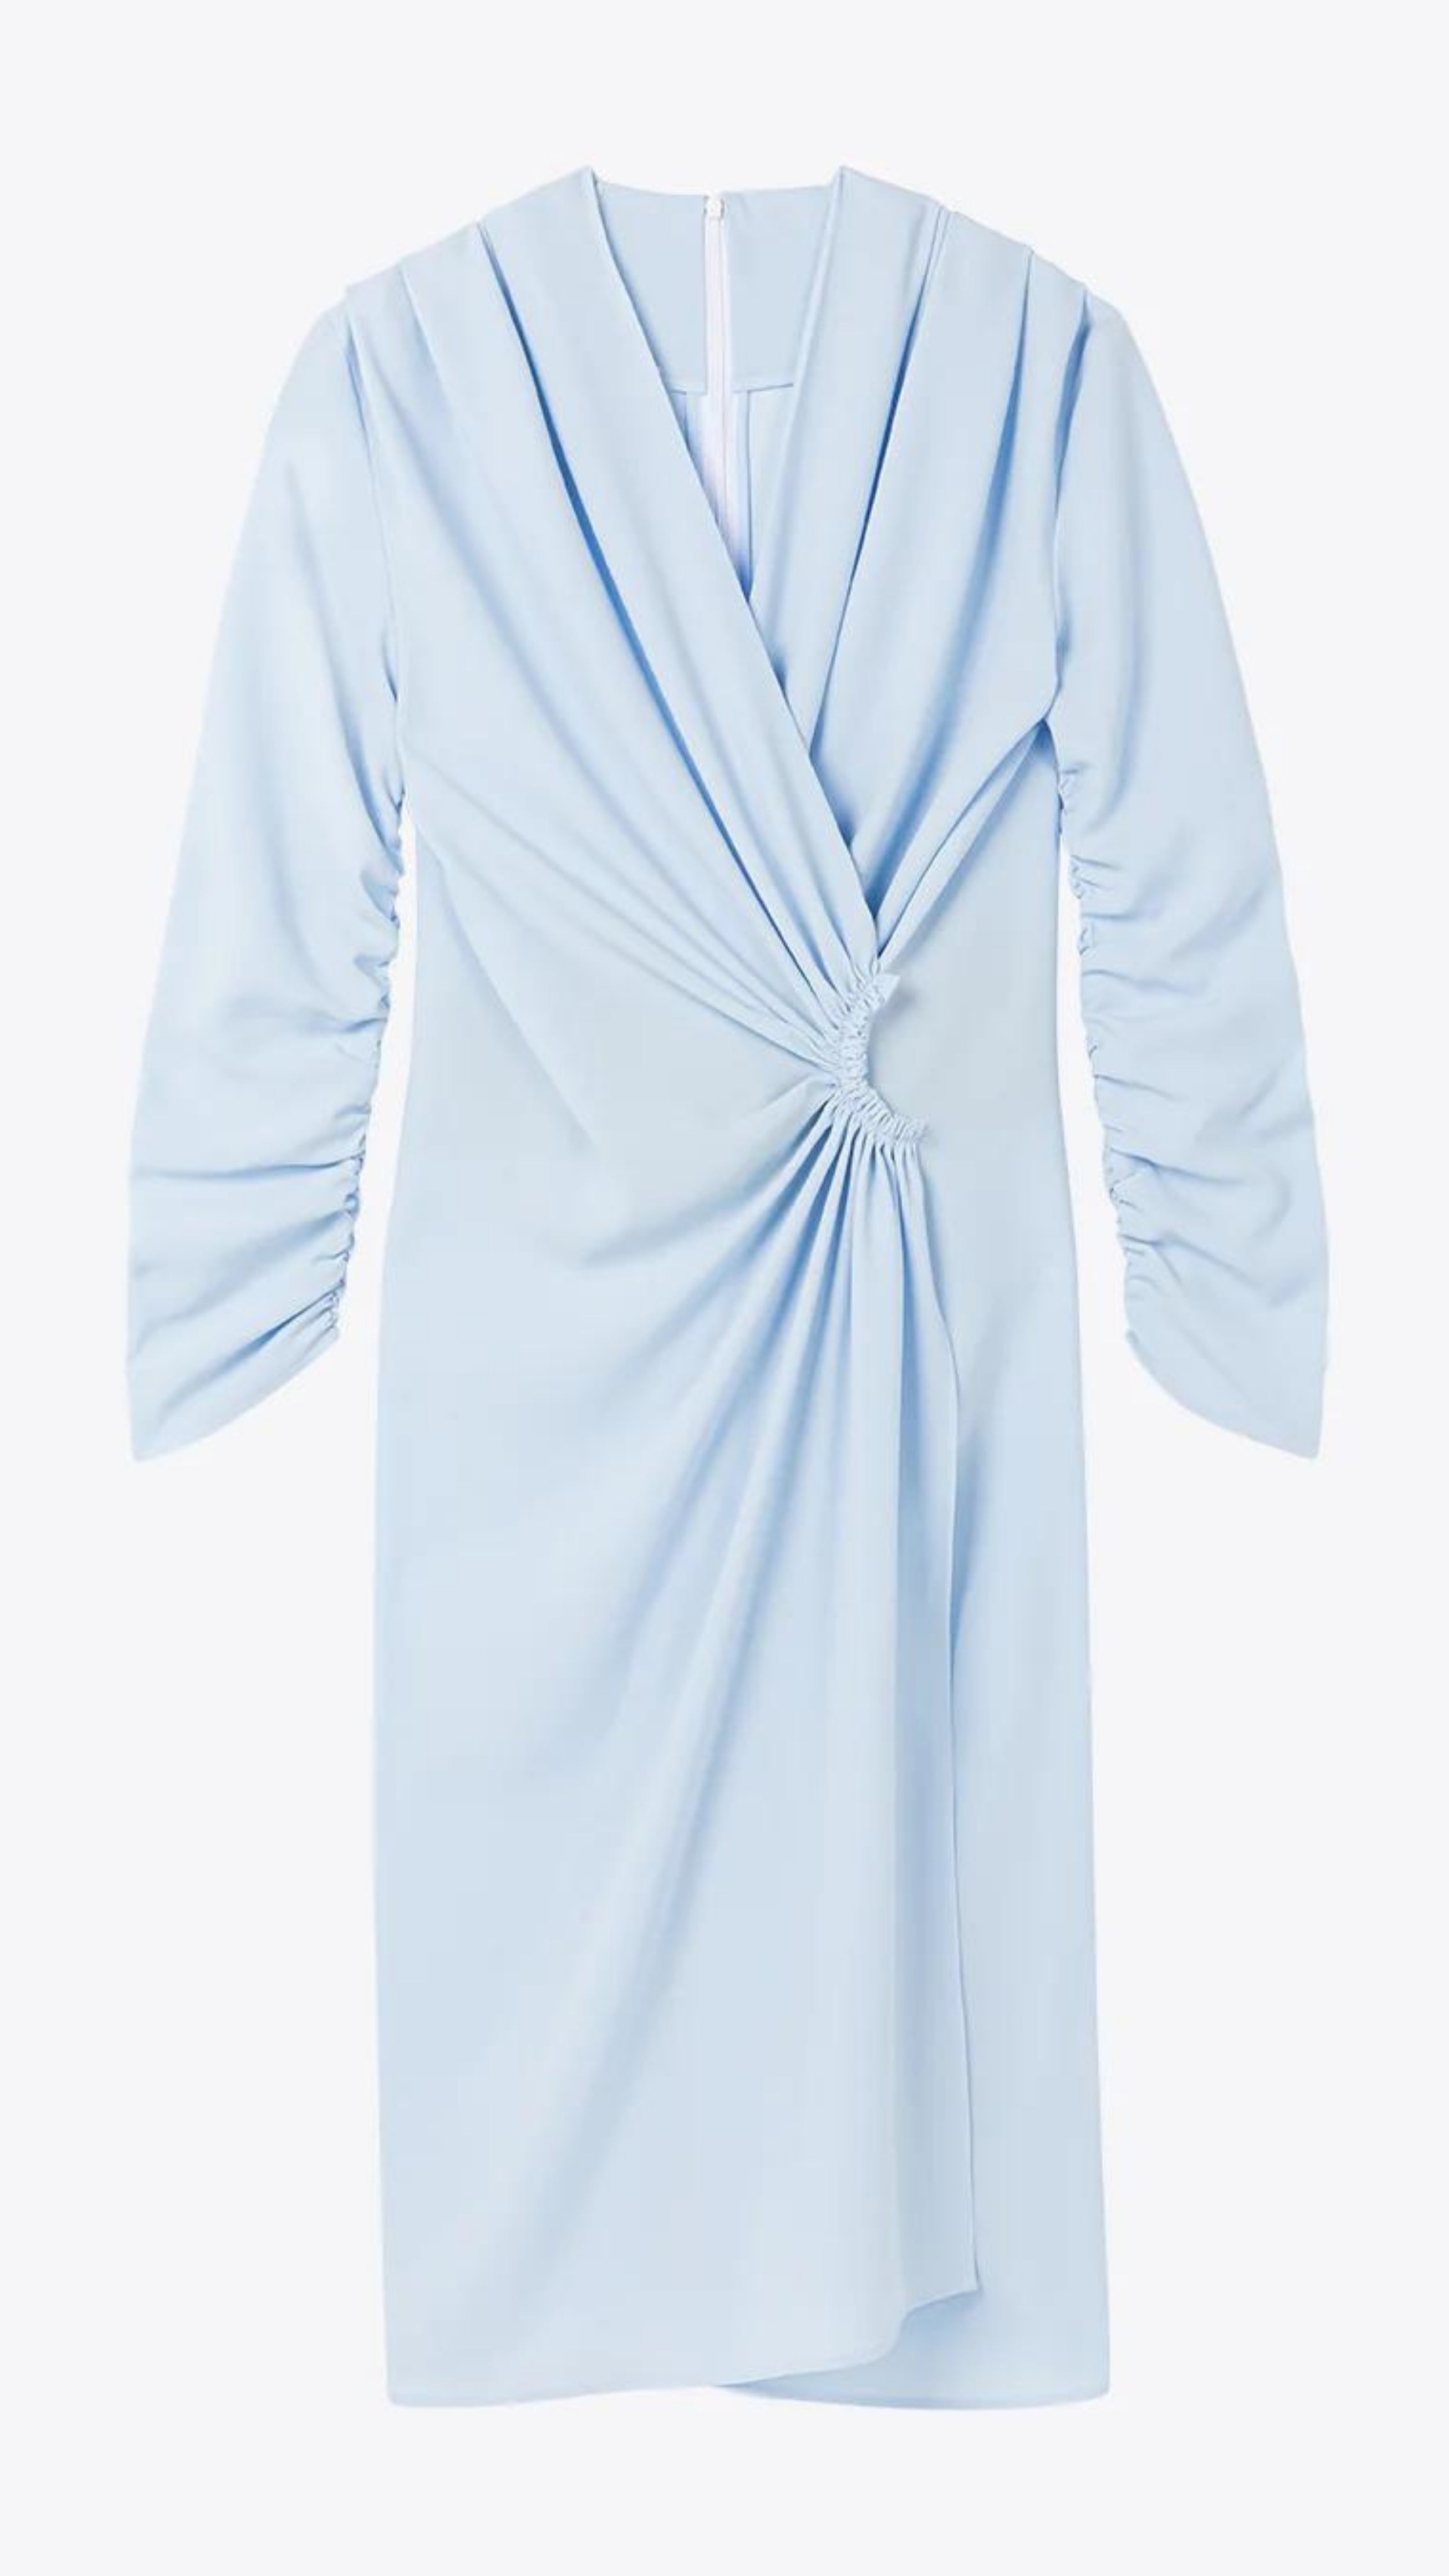 AZ Factory Lutz Huelle, Ella Dress. Crafted with a crepe texture in sky blue hue. V neck and draped, off center gathered front. Half length ruched sleeves  with a midi length skirt. Product photo facing front.